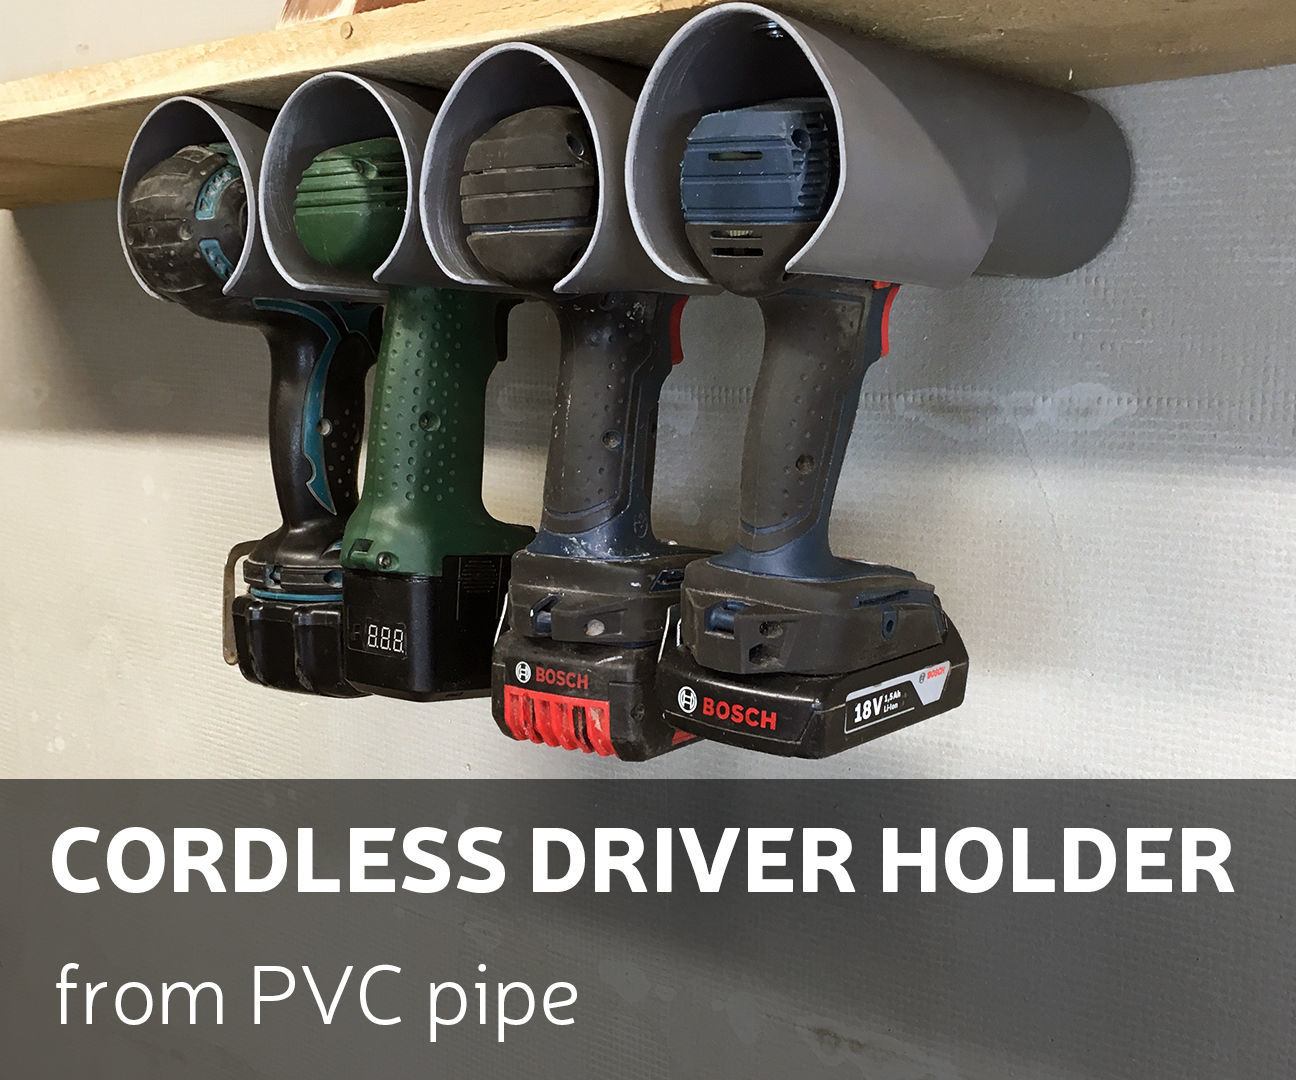 How to Make Cordless Driver Holder From PVC Pipe 